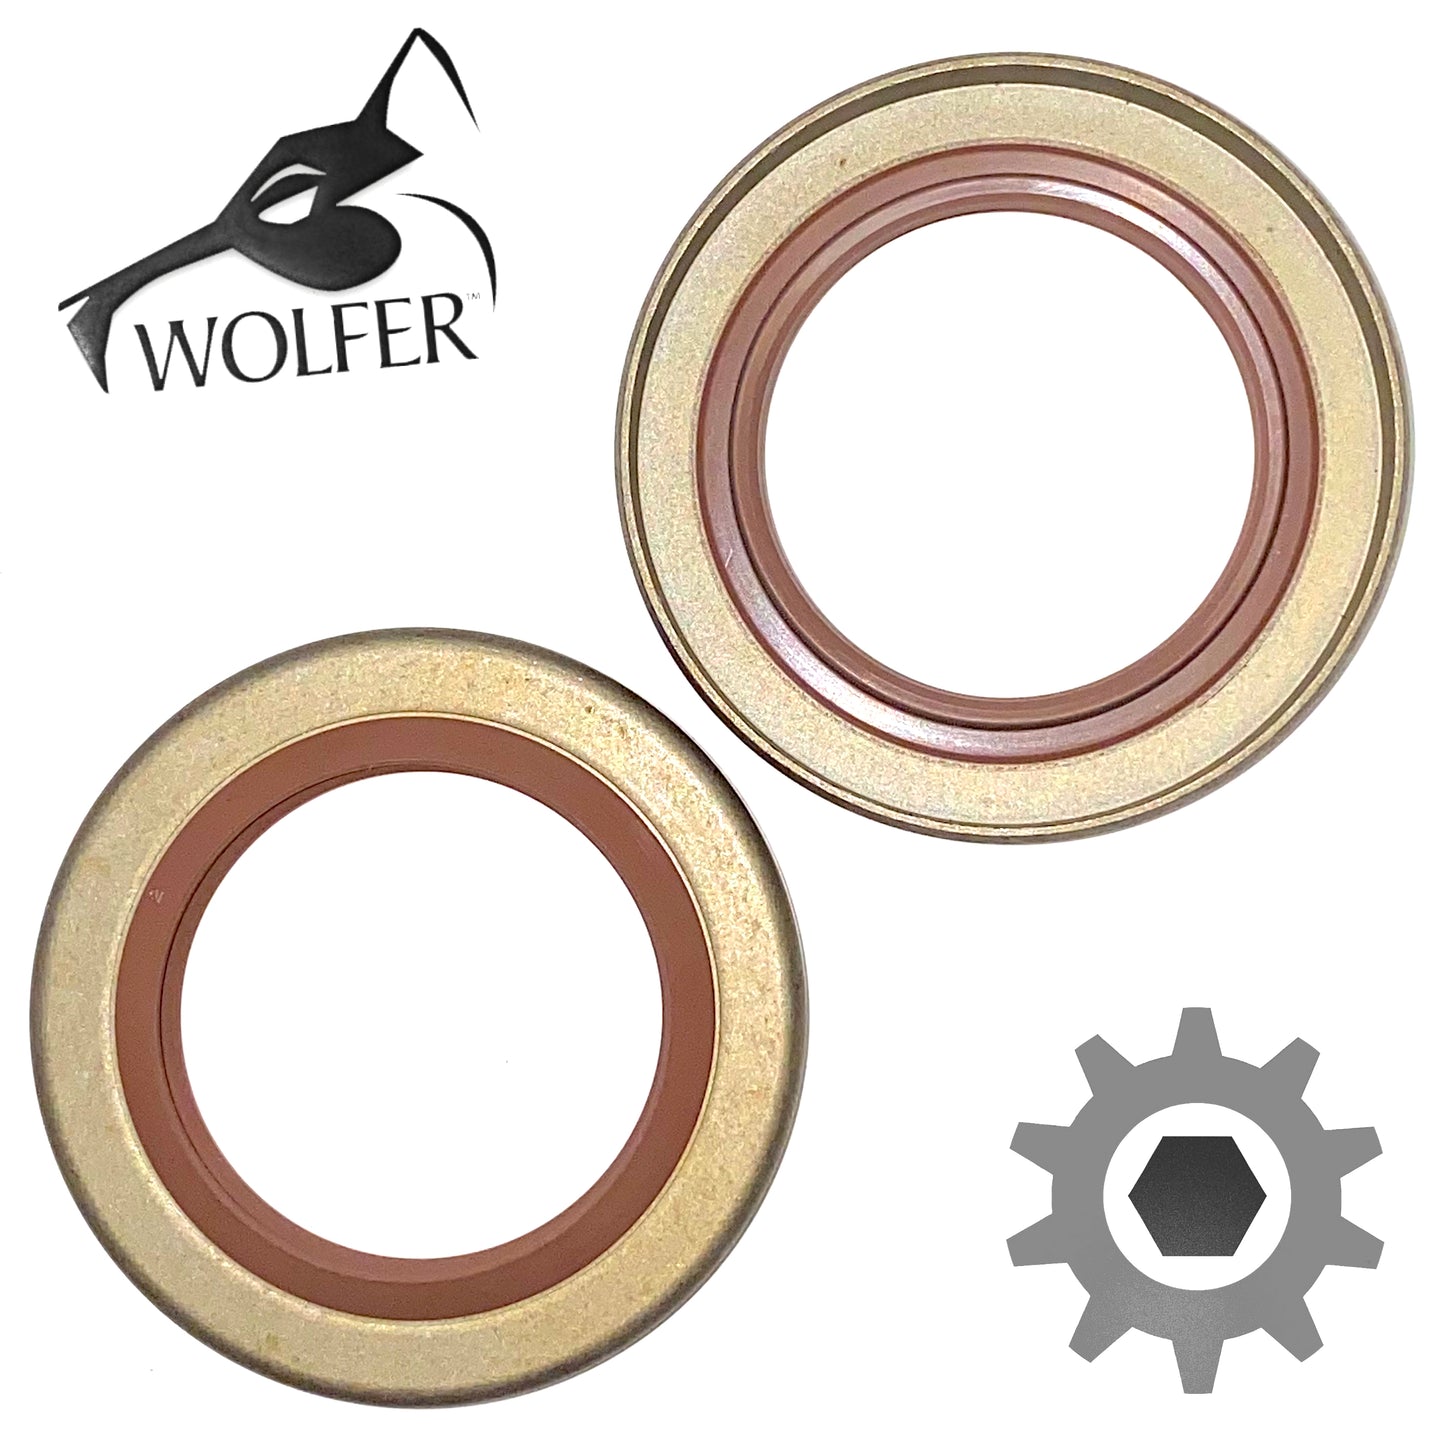 2 each - Differential Output Pinion Seals; Humvee Hummer; 5330011748145 6009472